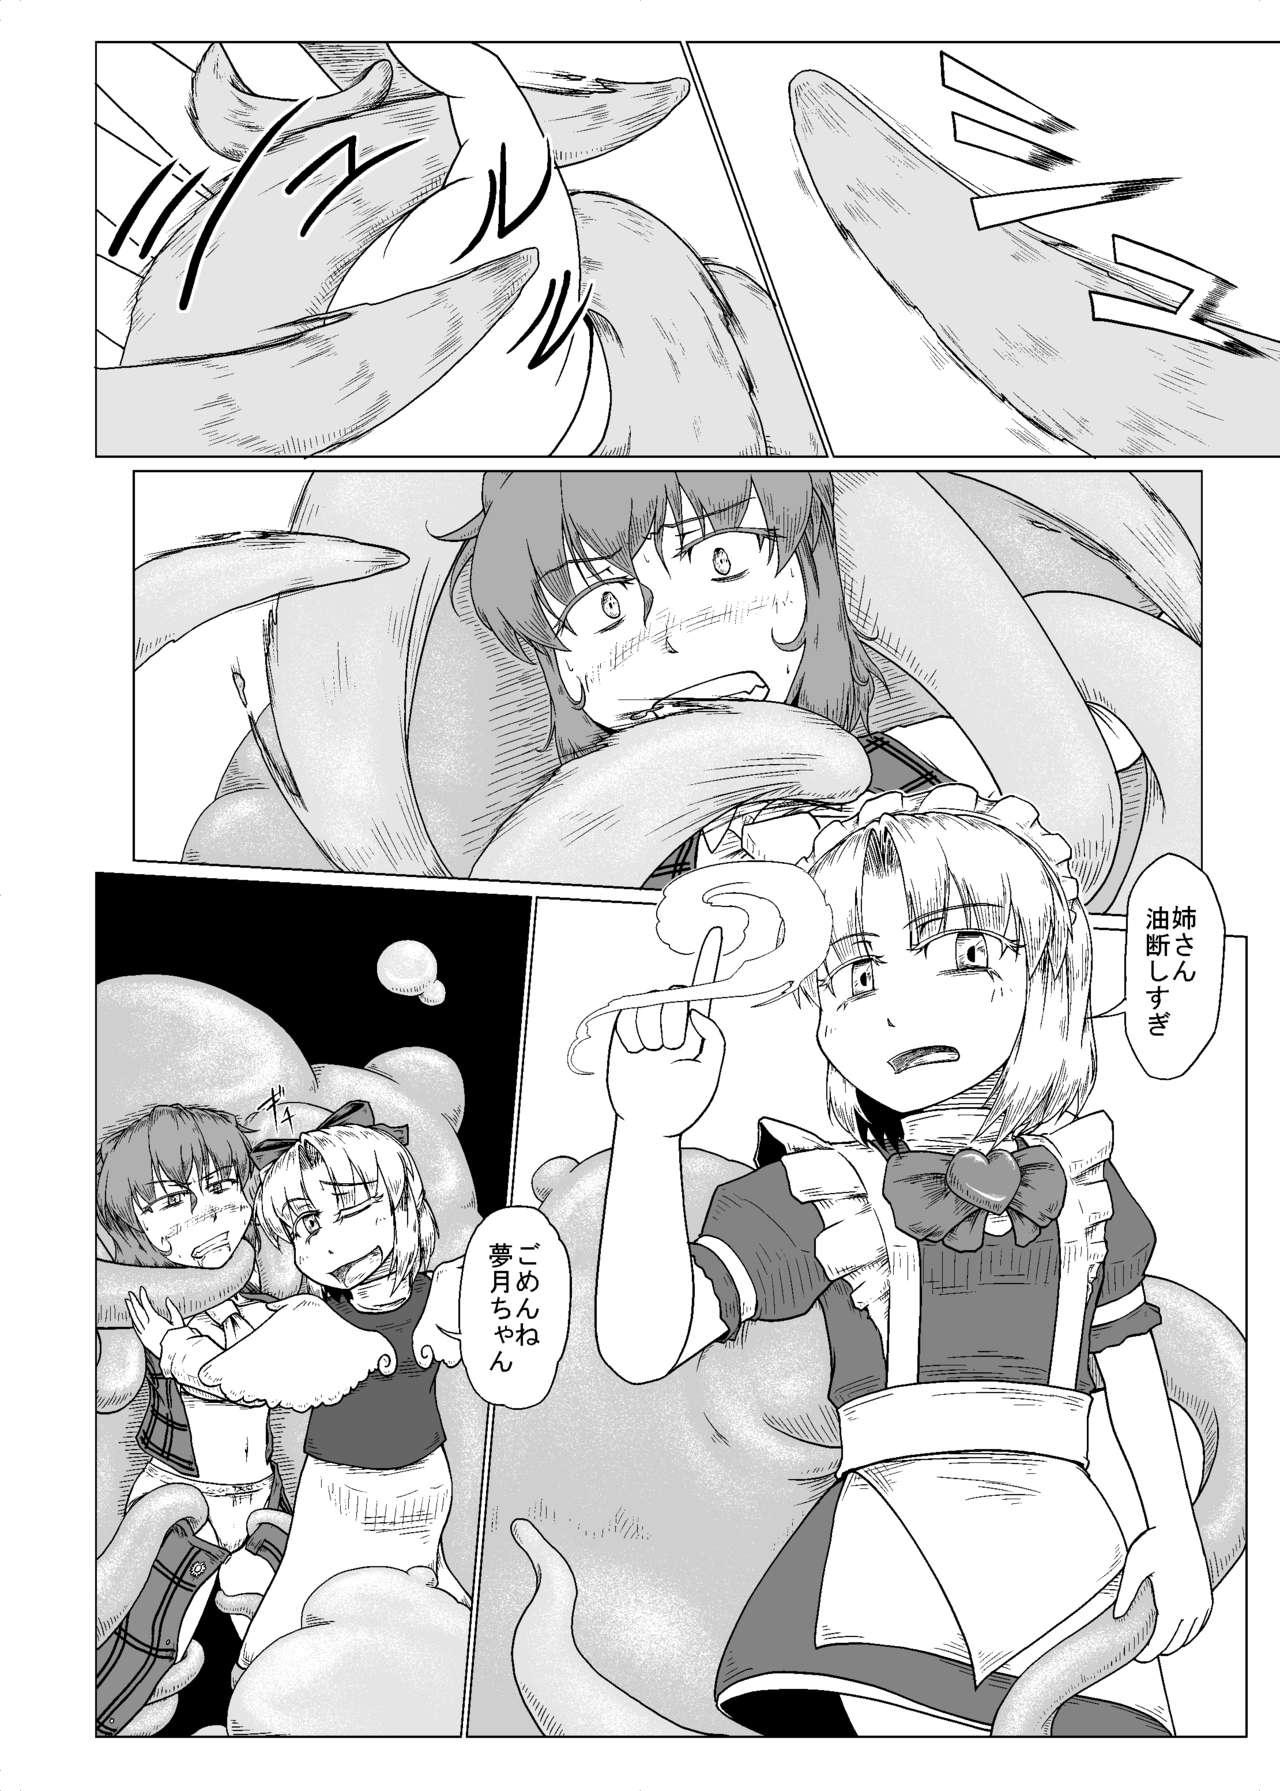 Ftvgirls 夢にとける - Touhou project Alone - Page 9